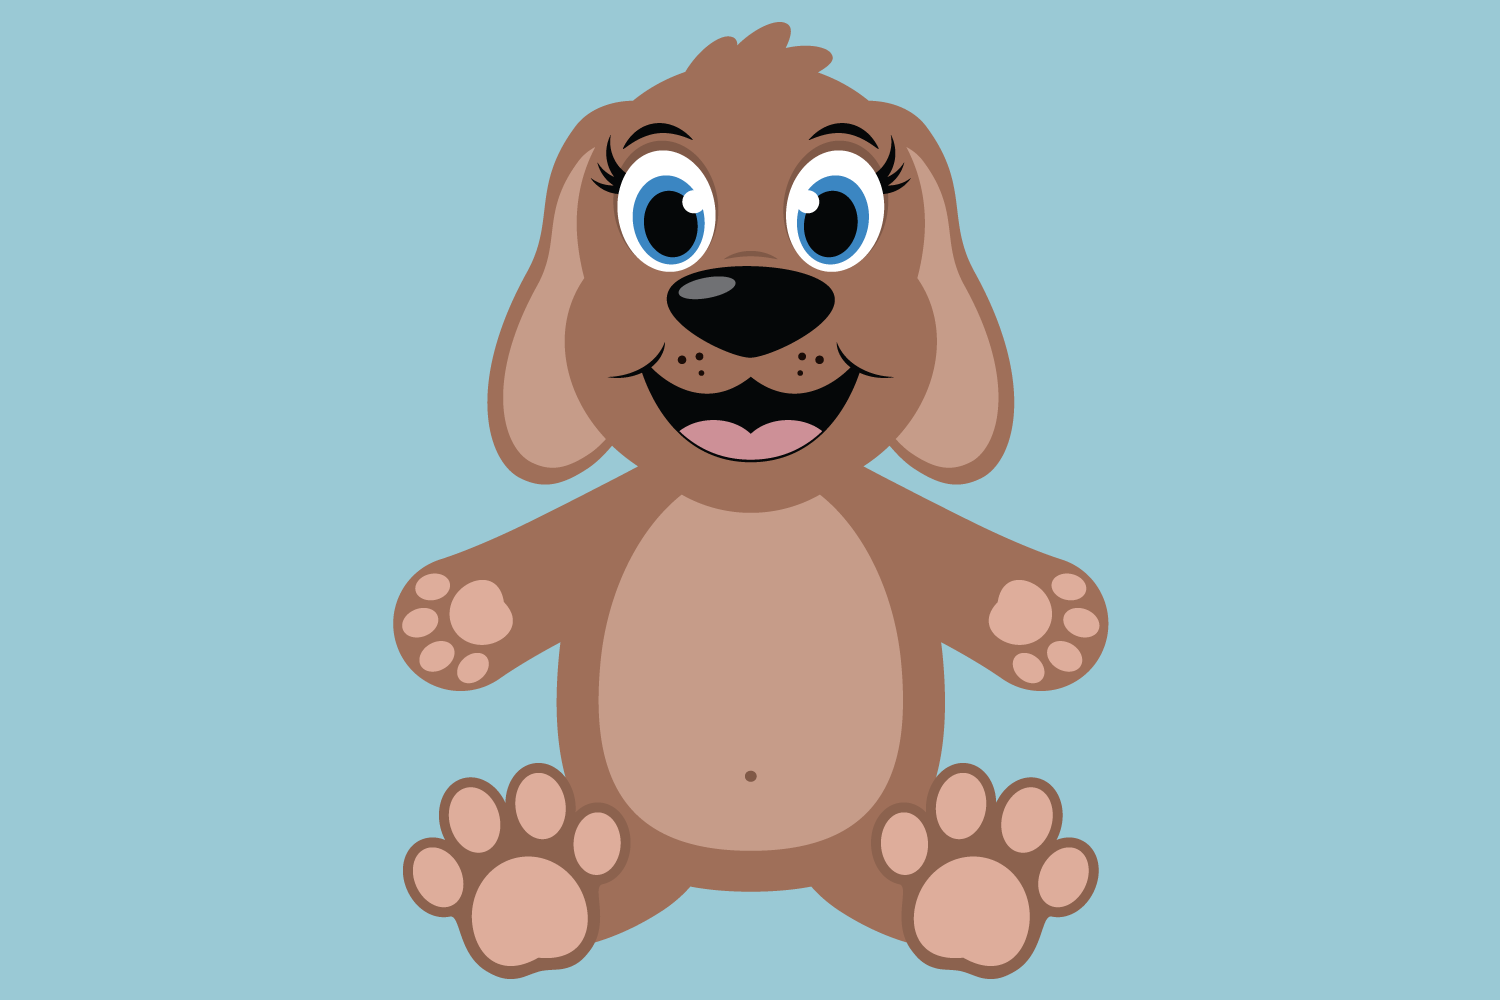 Cute Dog SVG Cut Files, PNG dog clipart, happy puppy face